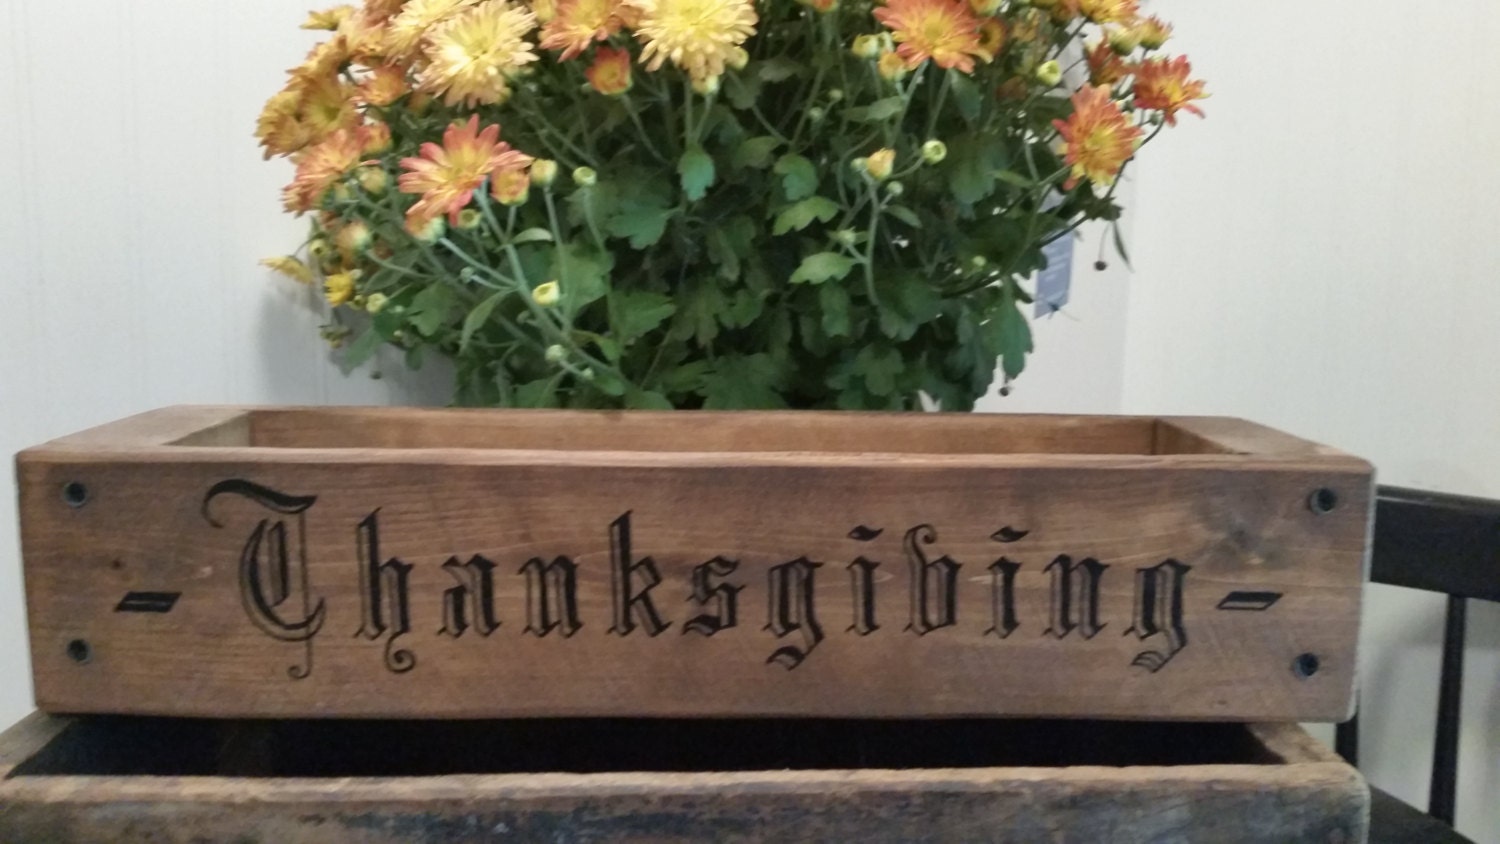 Thanksgiving decoration, Handcrafted box made with upcycled wood, Centerpiece for harvest table, Fall home accent, Hand painted box,